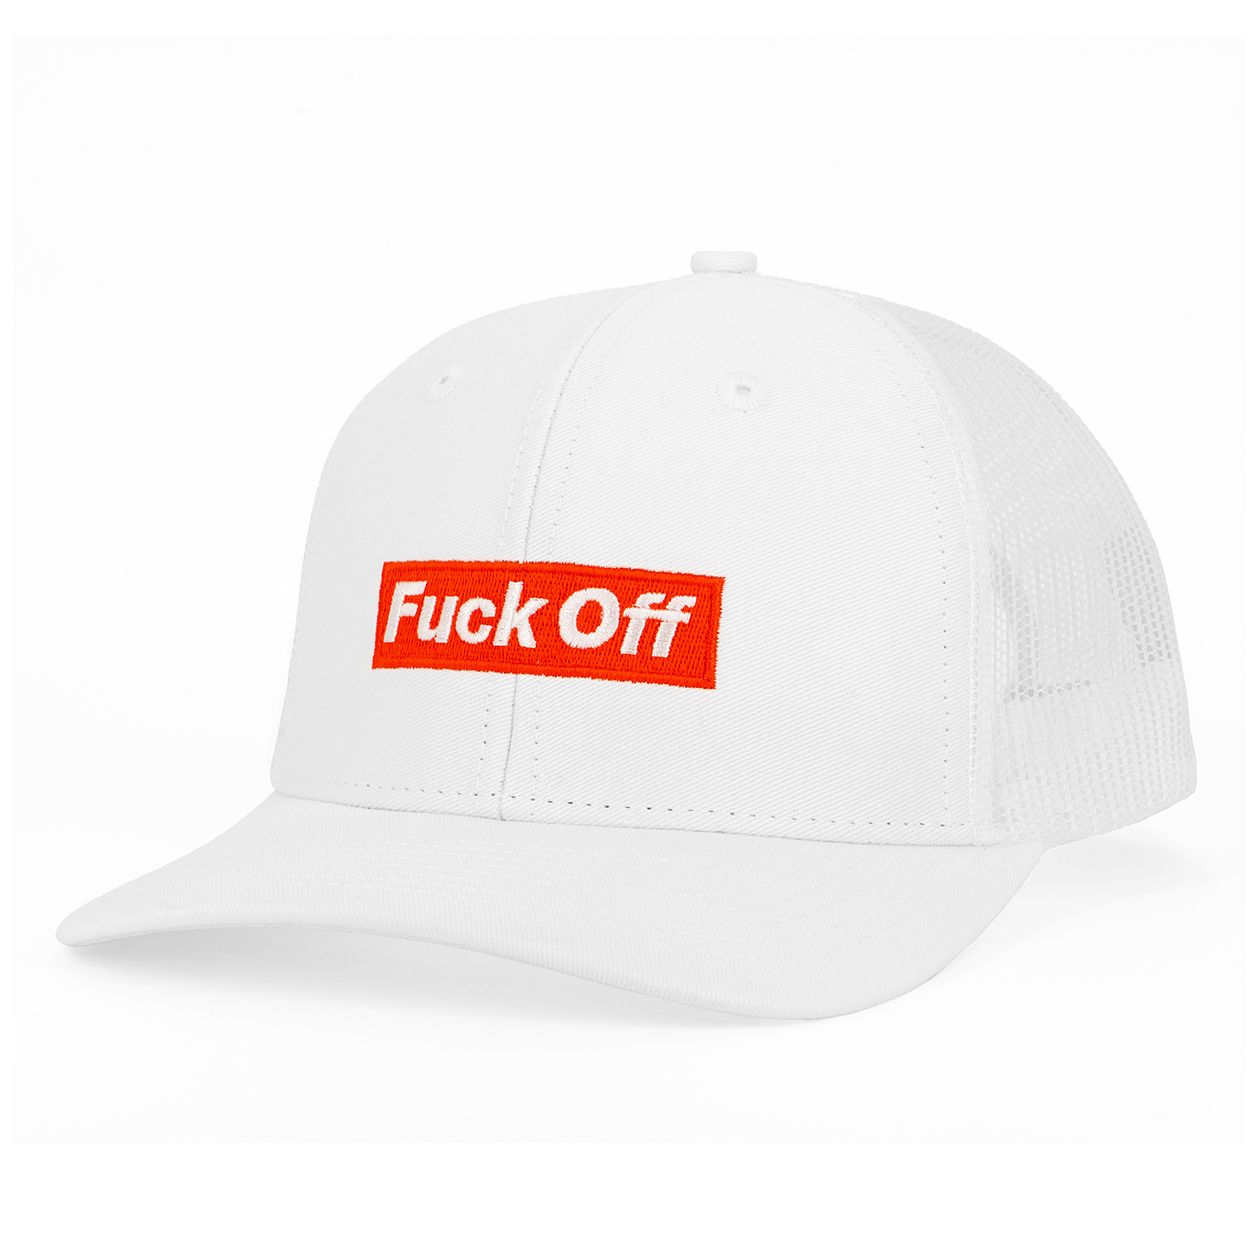 HAT FUCK OFF (NET)(Out Mid Jun